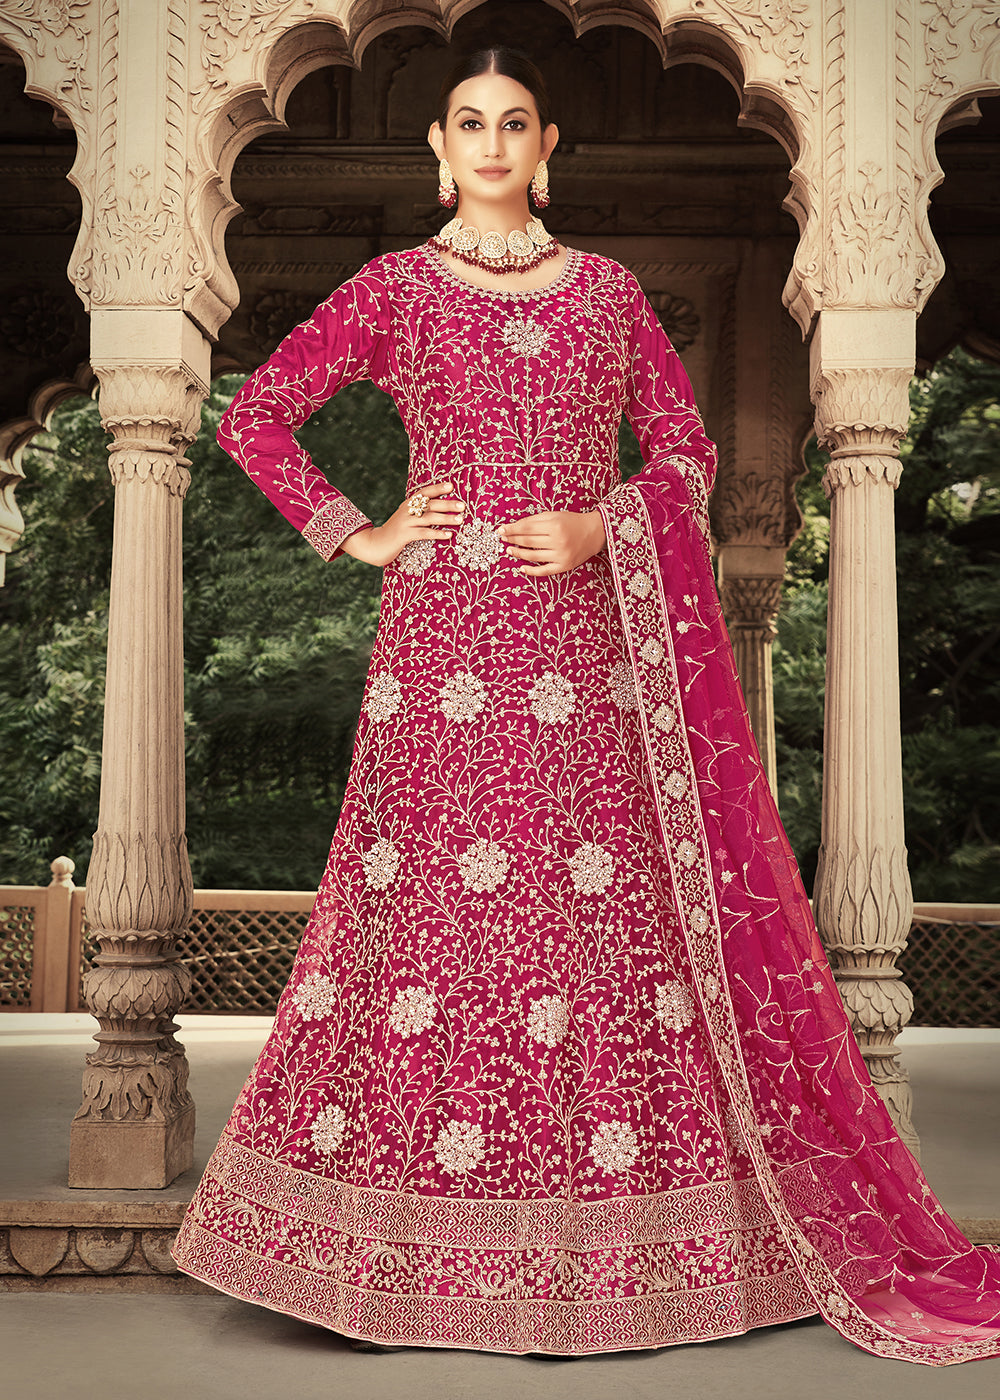 Buy Now Pink Zarkan Diamond Embroidered Bridal Anarkali Suit Online in Canada at Empress Clothing. 